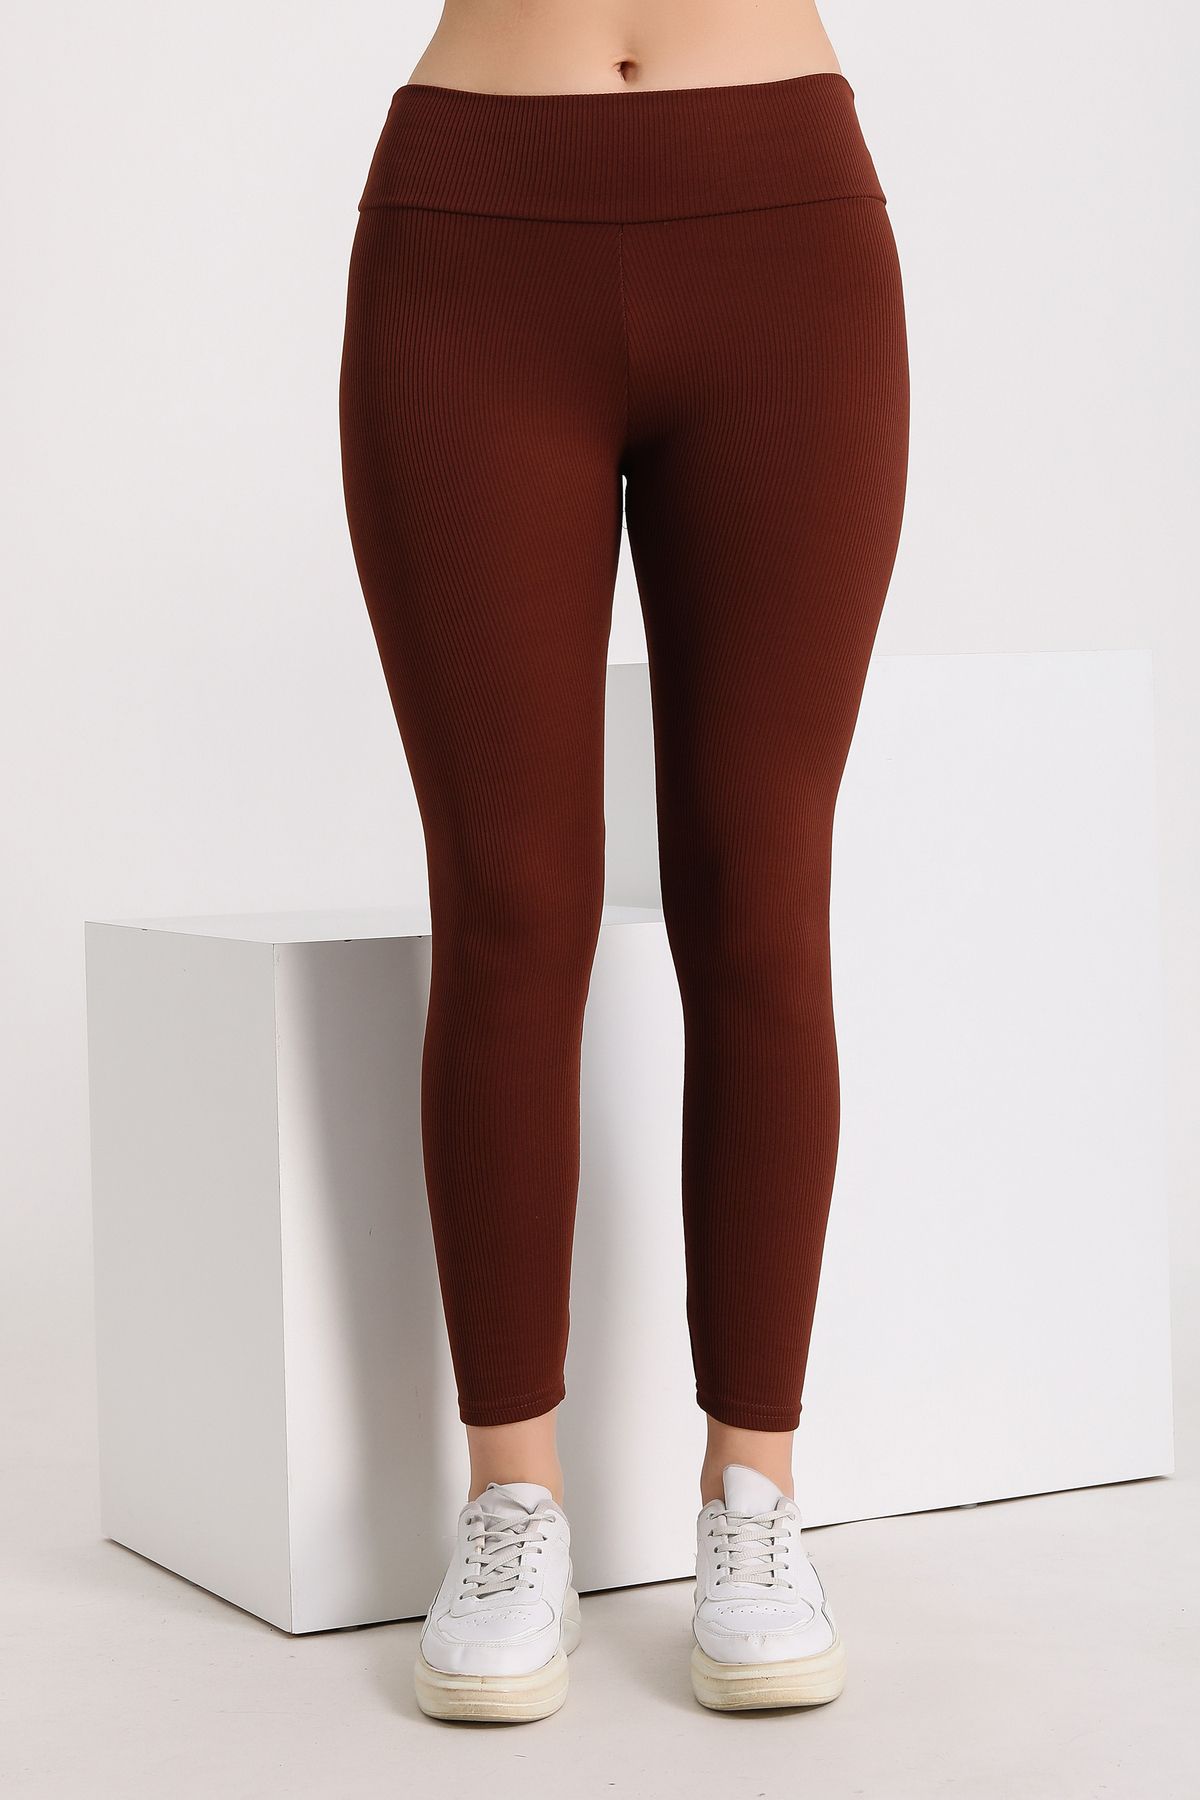 BANEGA Curve Plus Size Ribbed Raised High Waist Brown Winter Tights -  Trendyol